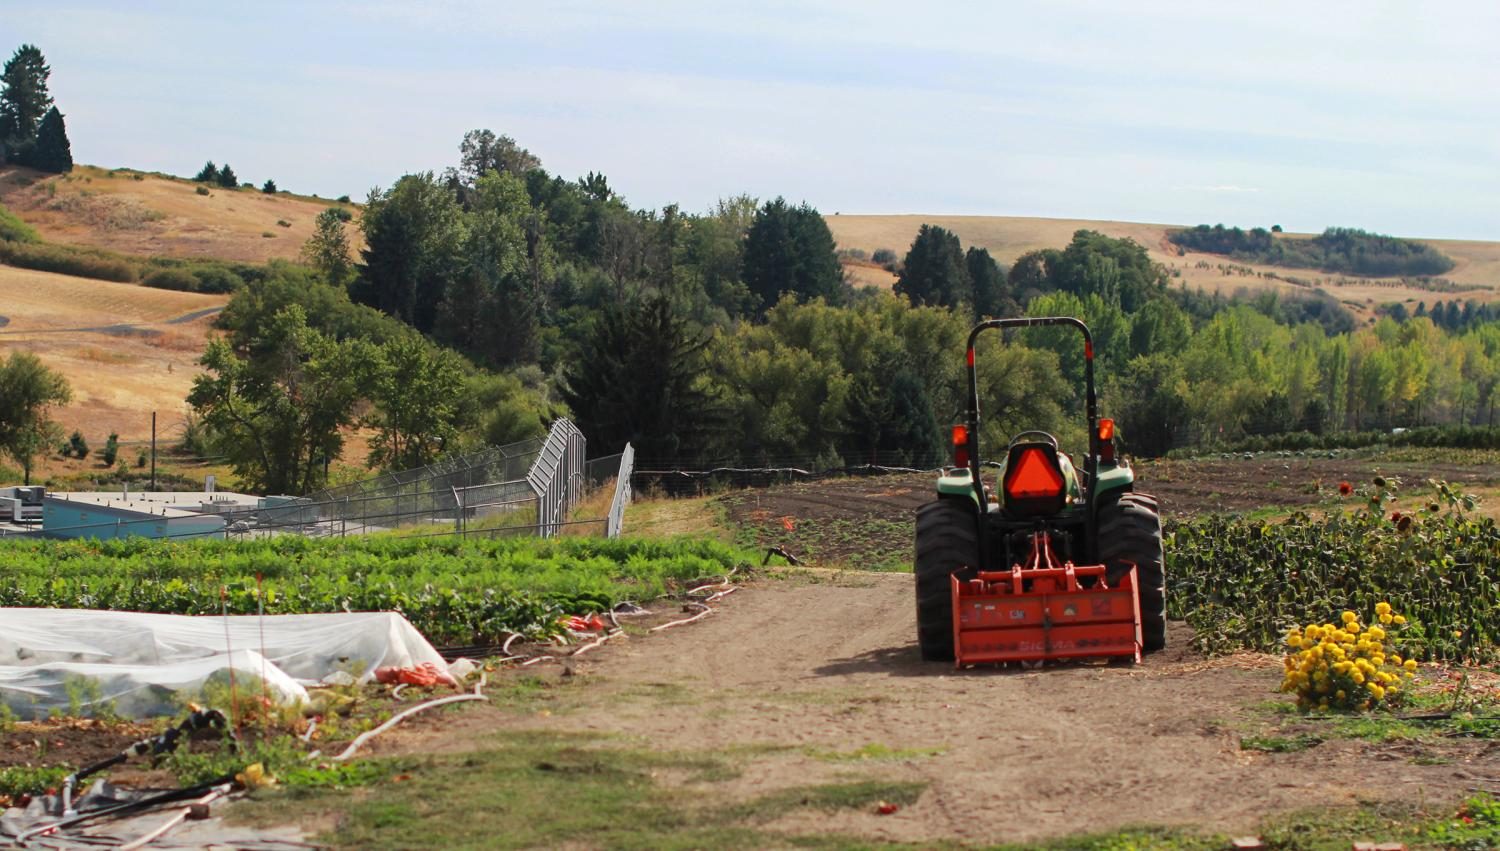 The WSU Organic Farm is located on campus, and they hold a produce stand  from 3 - 6 p.m. every Friday.